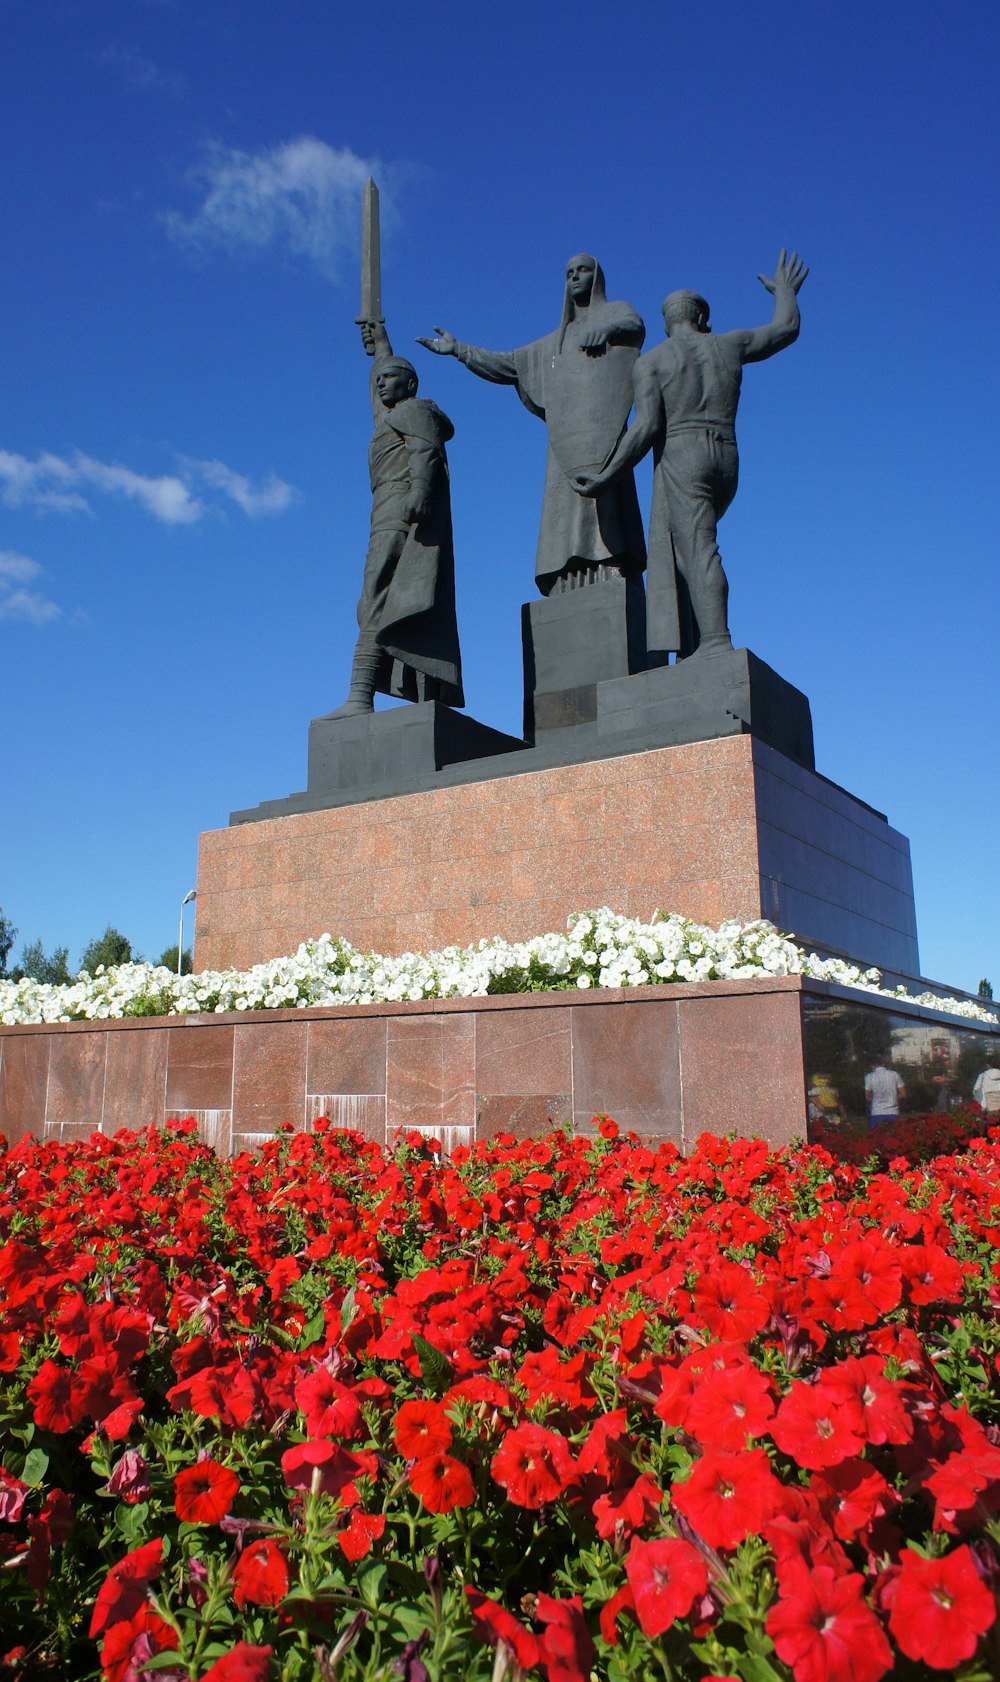 a statue of three men holding a sword in front of a field of red flowers